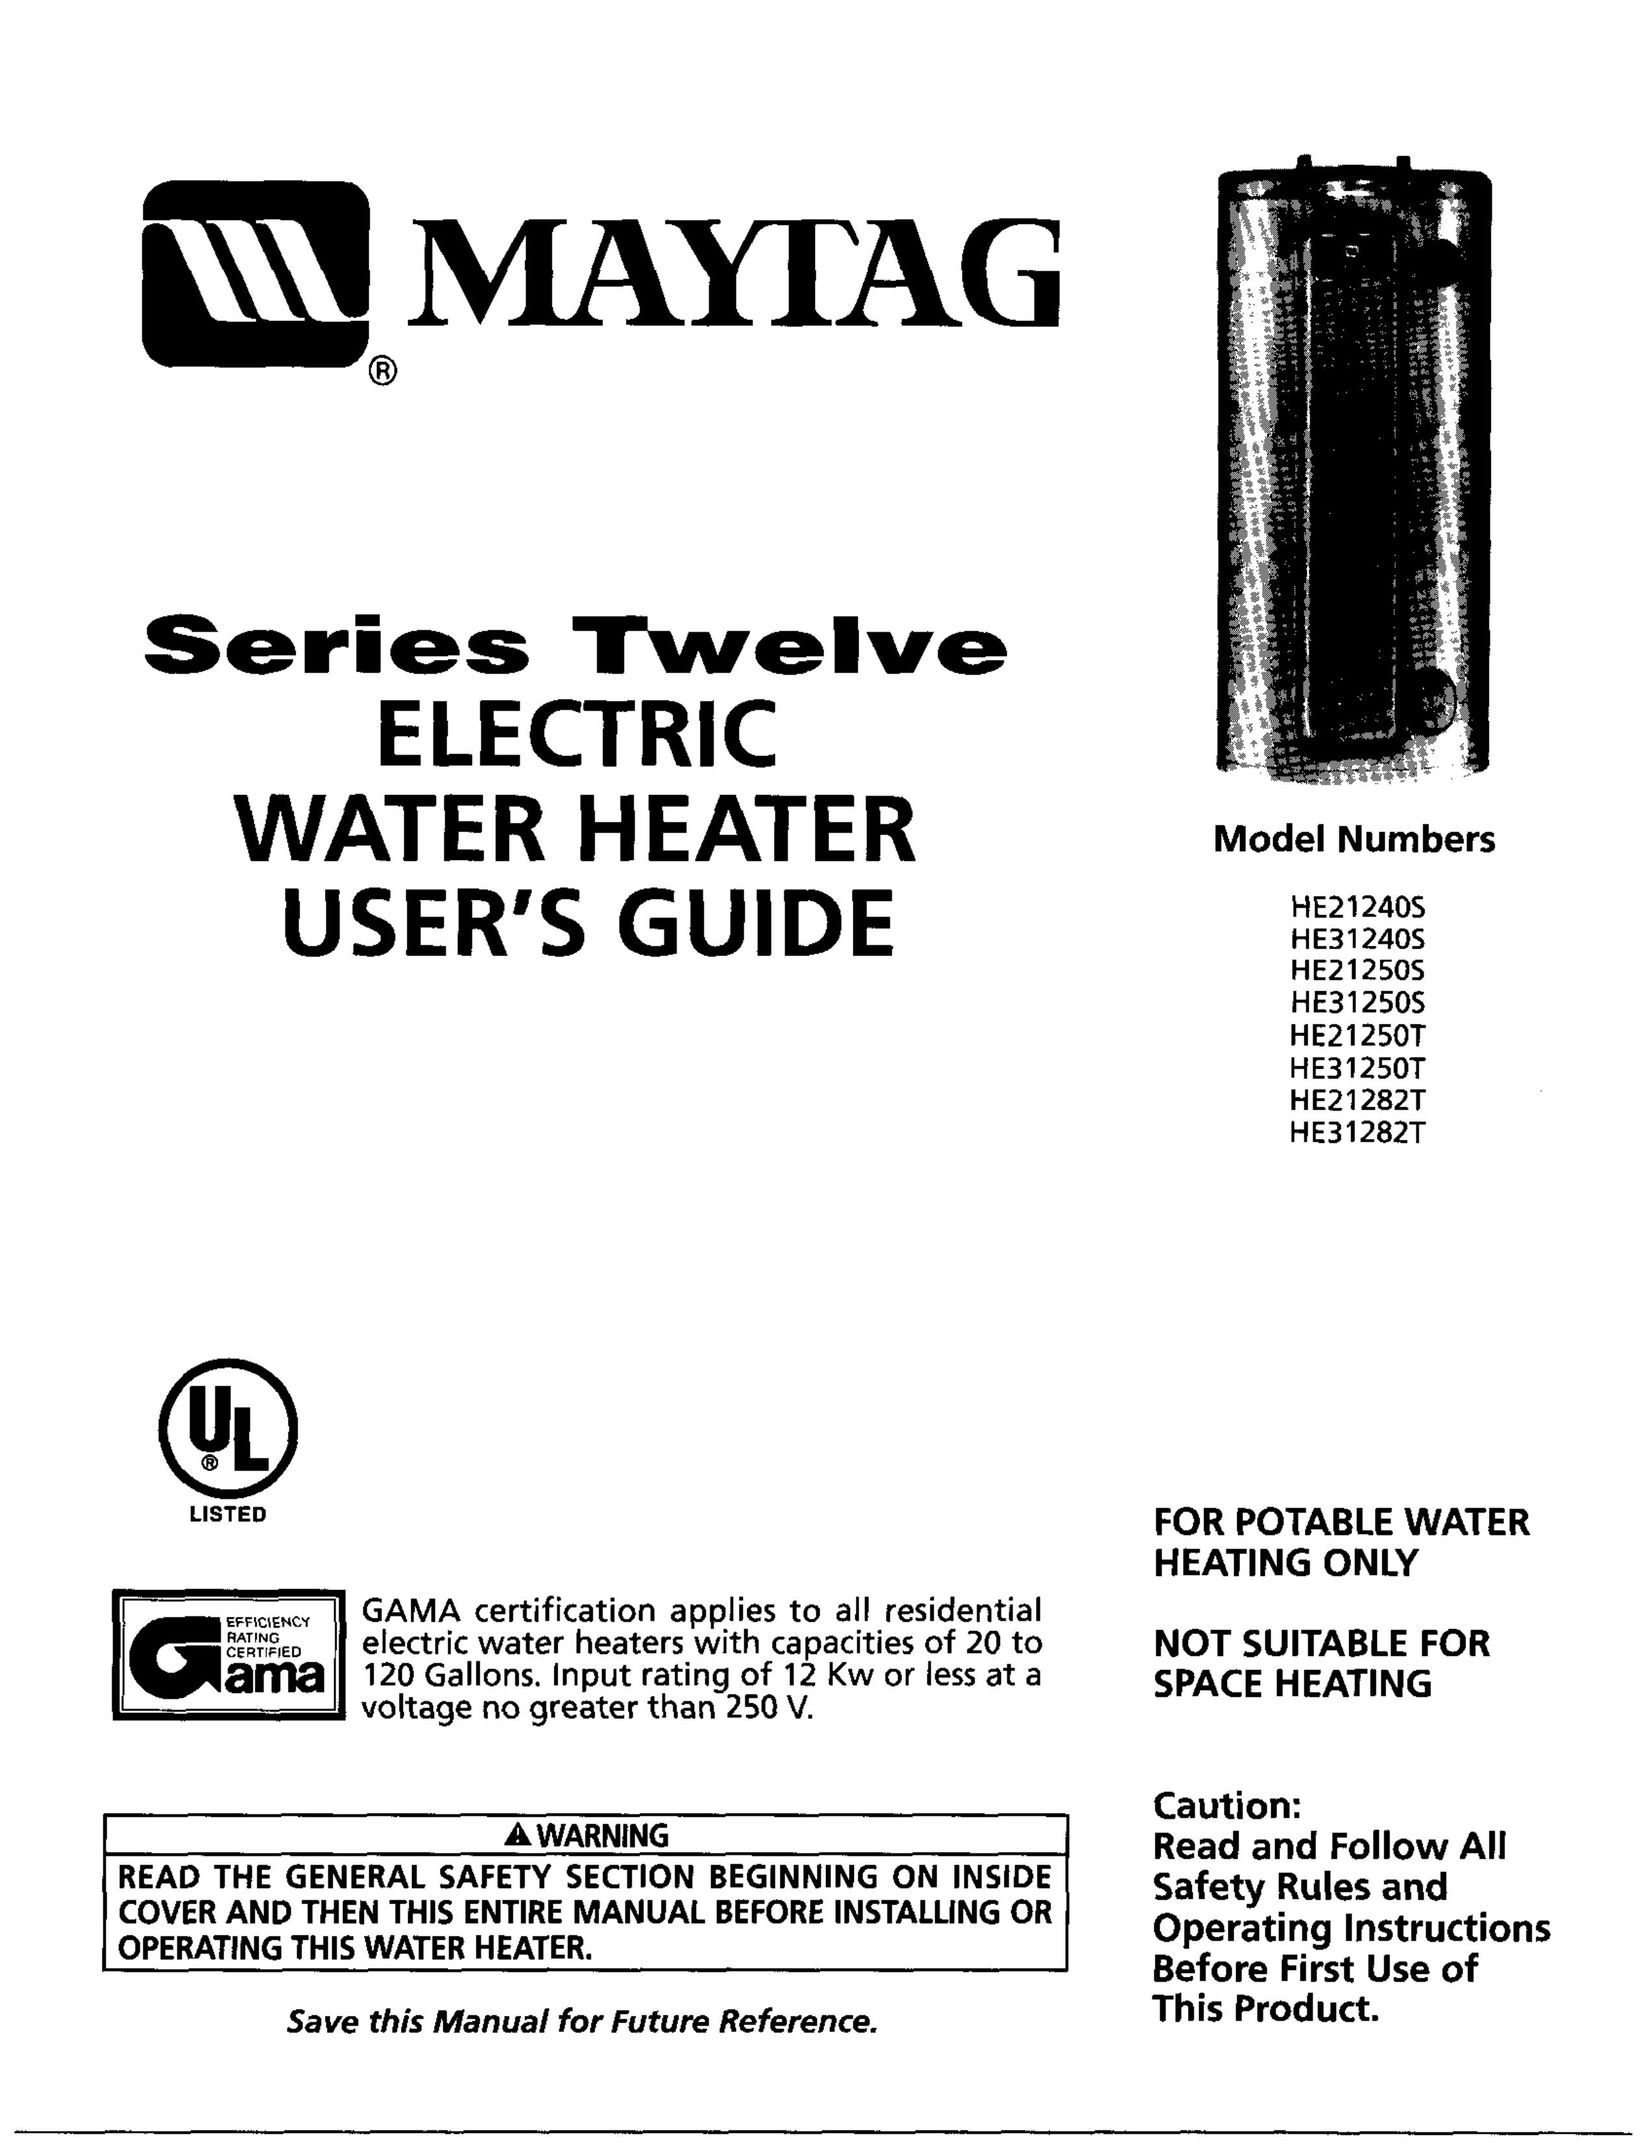 Maytag HE21250T Water Heater User Manual